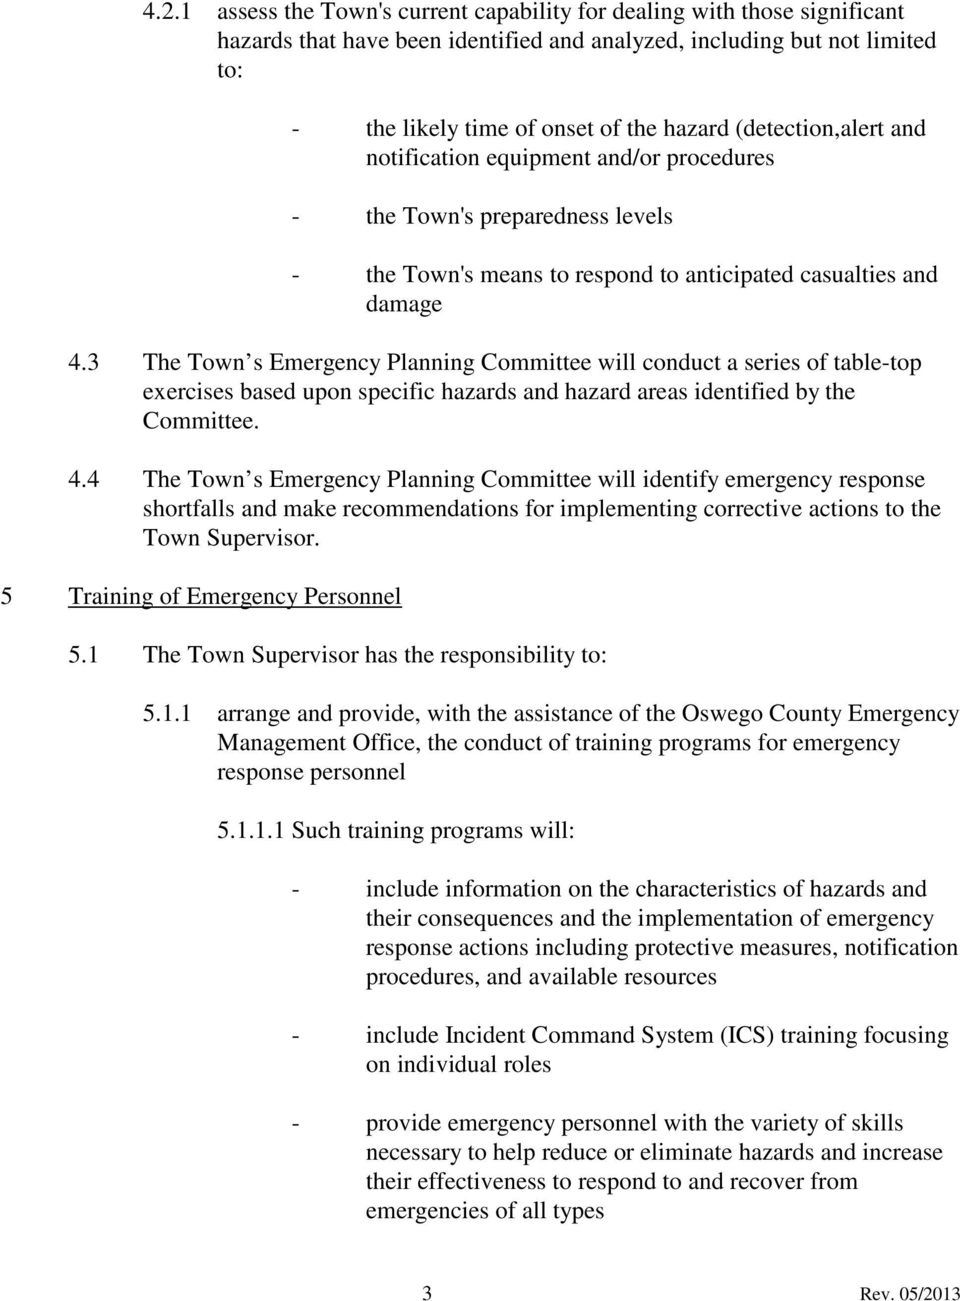 3 The Town s Emergency Planning Committee will conduct a series of table-top exercises based upon specific hazards and hazard areas identified by the Committee. 4.